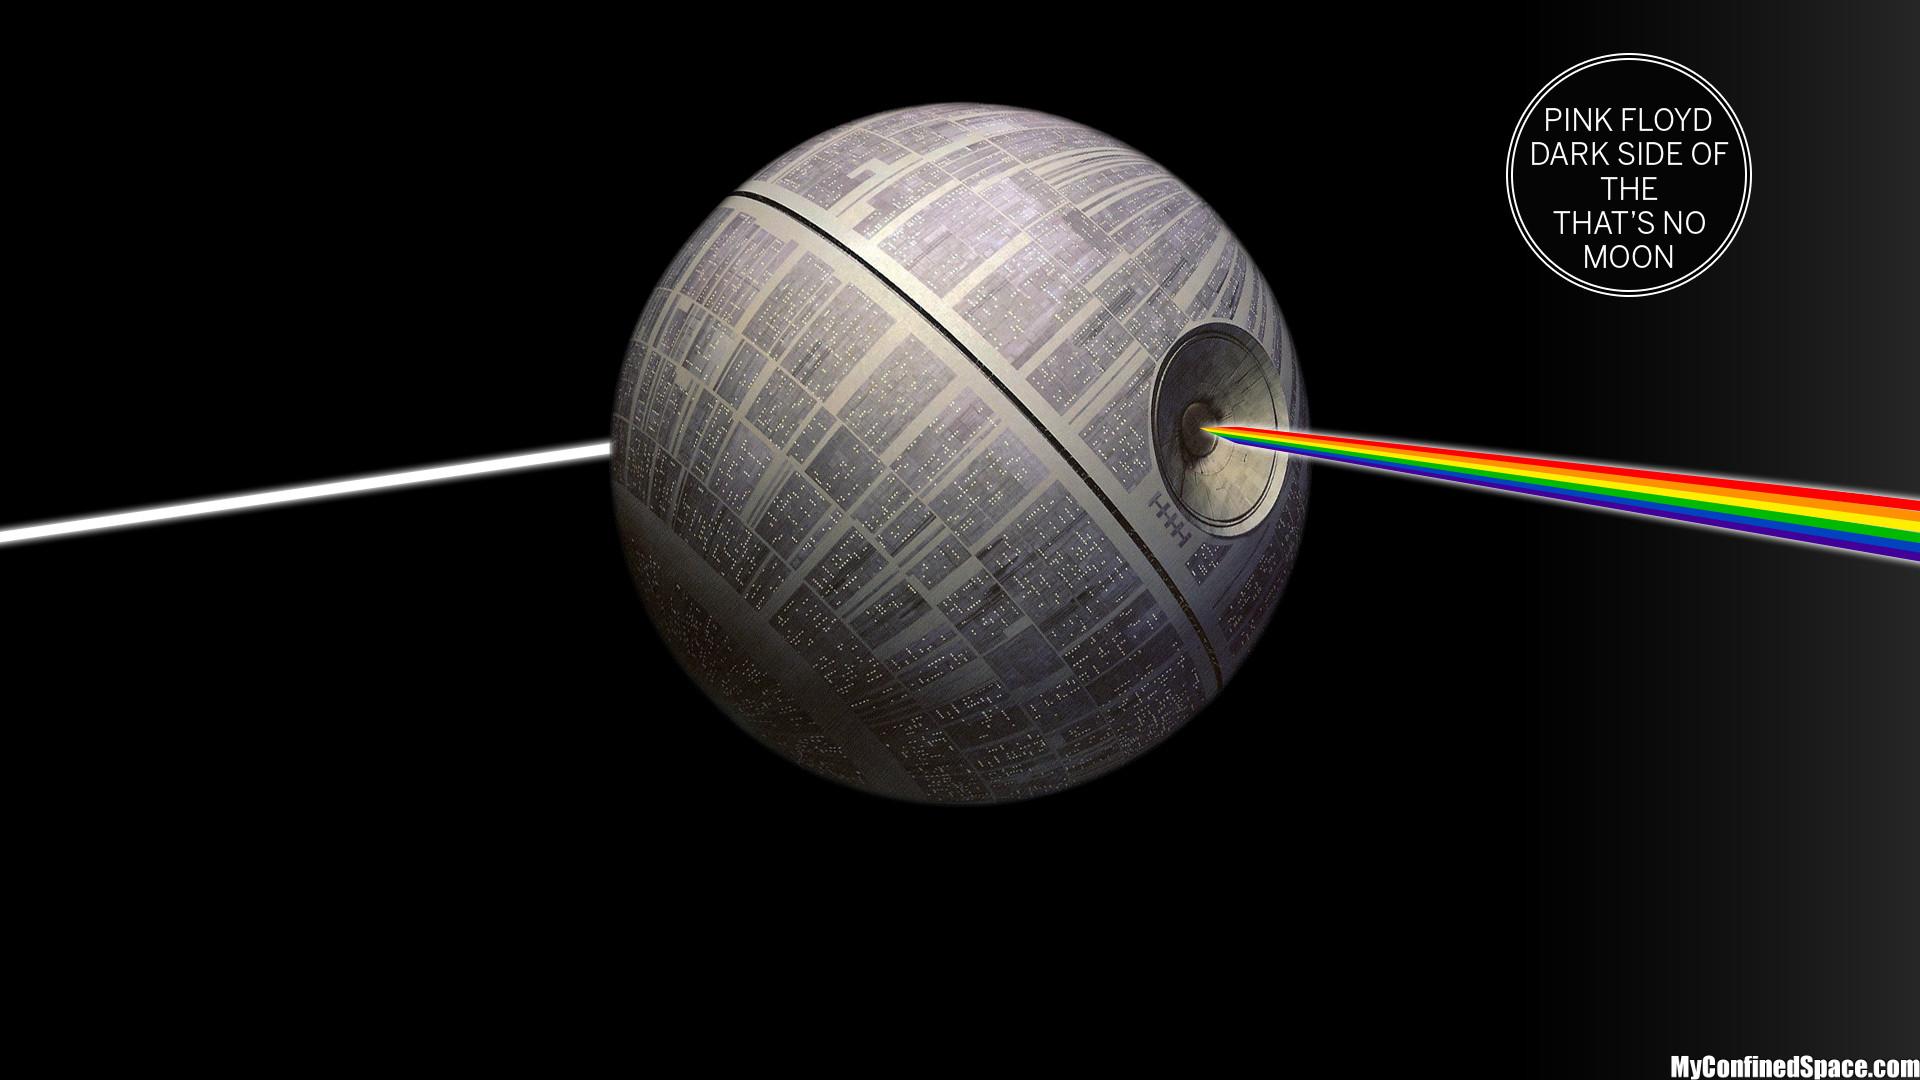 Dark Side Of The That's No Moon - 1920x1080 Wallpaper 